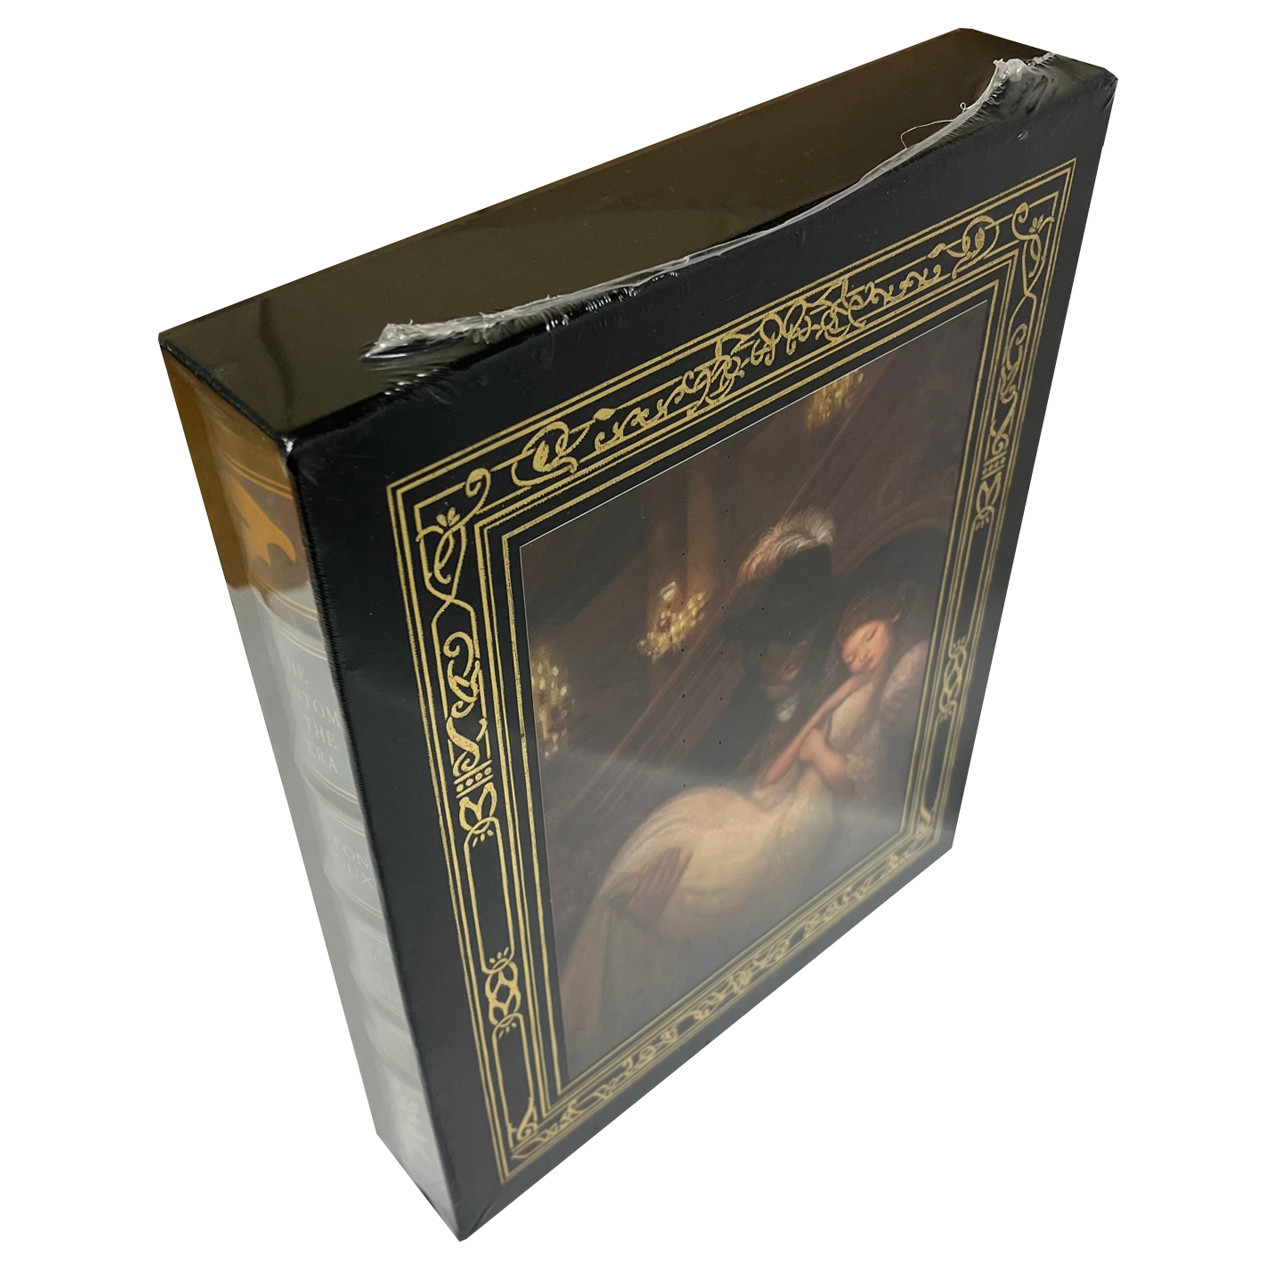 Gaston LeRoux "The Phantom of the Opera" Slipcased Signed Limited Artist Edition, Leather Bound Collector's Edition [Sealed]